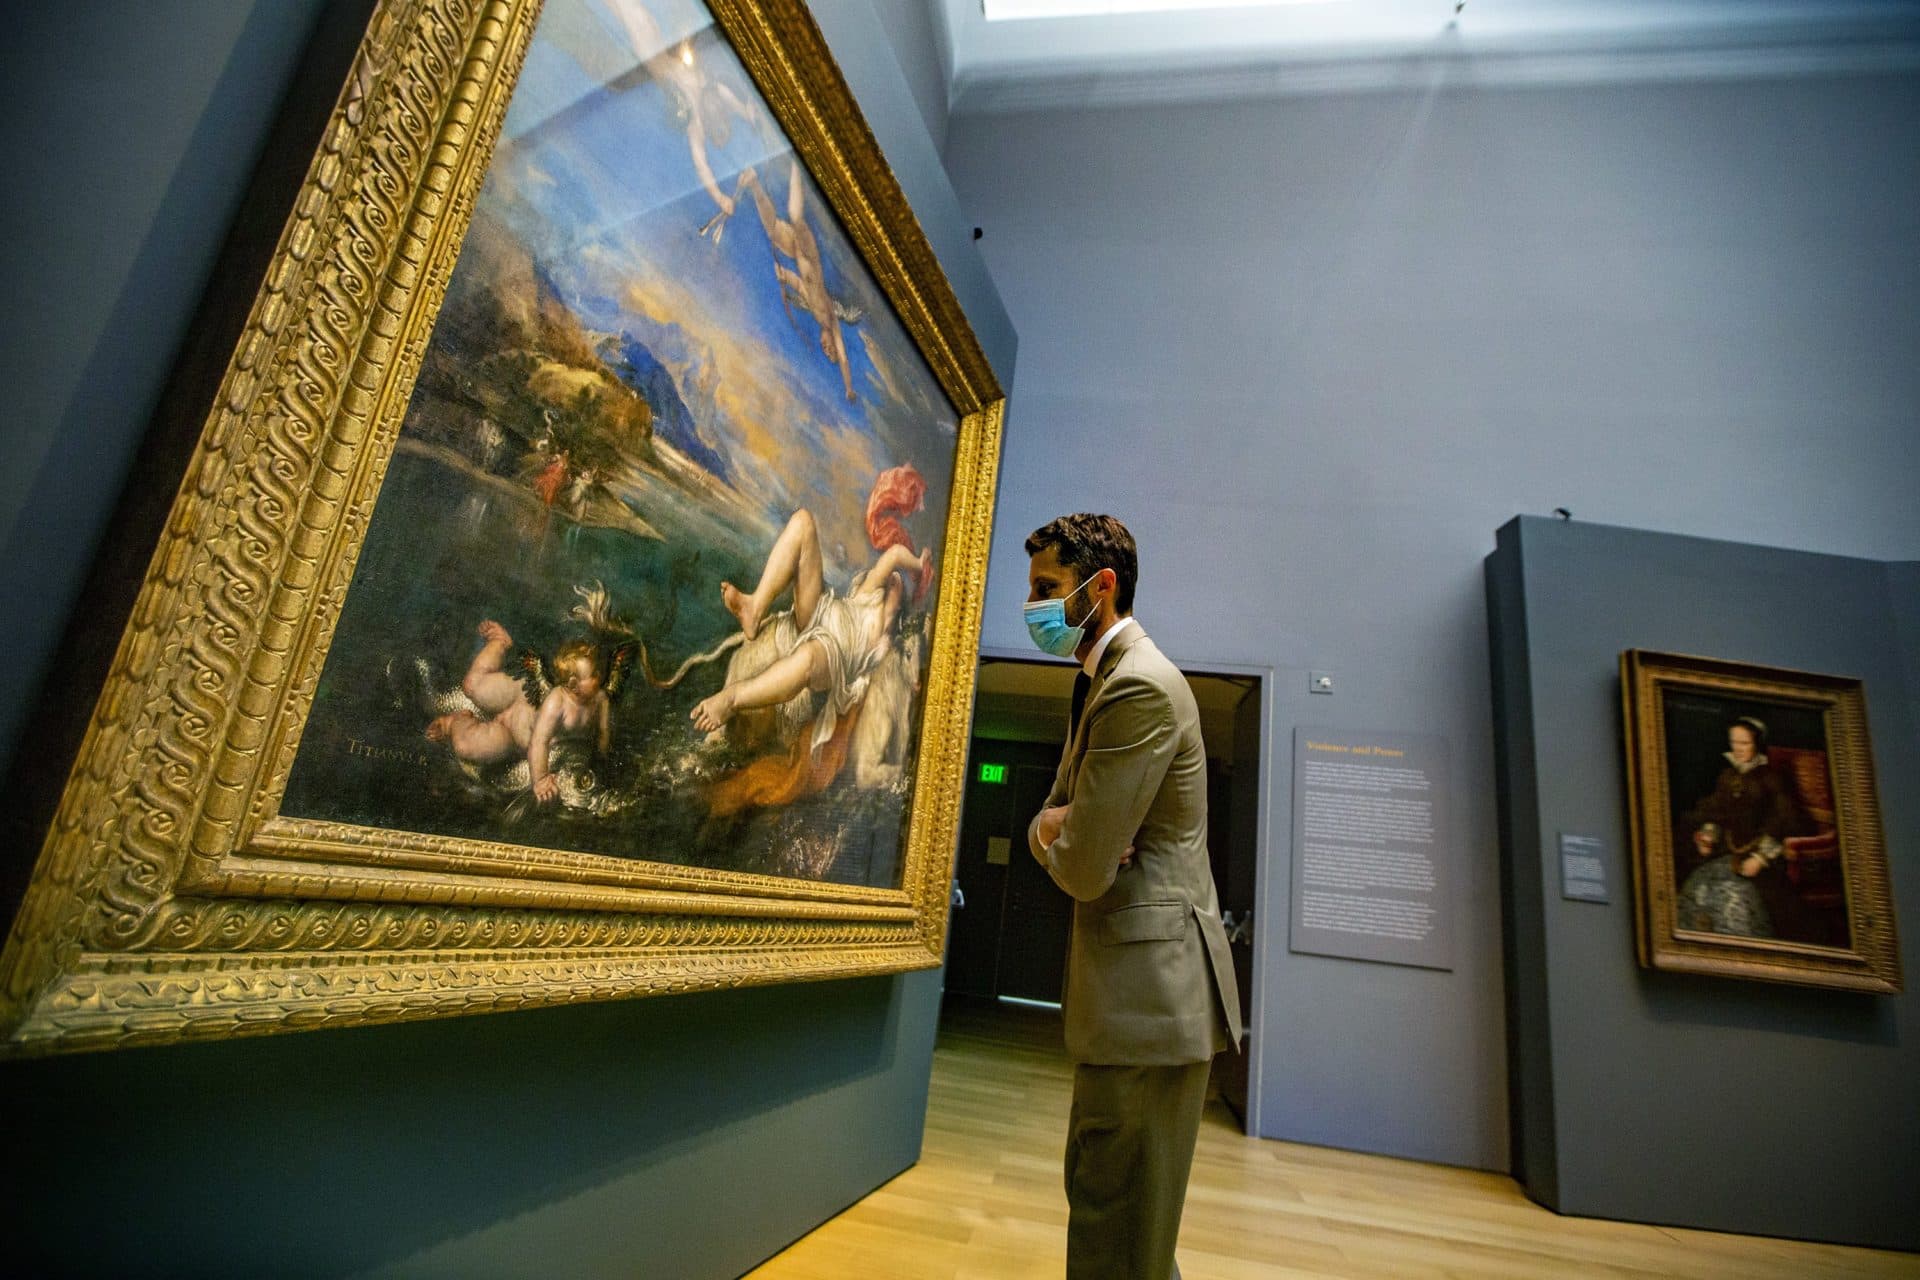 Curator Nat Silver closely examines Titian’s &quot;The Rape of Europa&quot; during a check of the newly installed exhibit of the artist’s work in the Hostetter Gallery at the Isabella Stewart Gardner Museum. (Jesse Costa/WBUR)